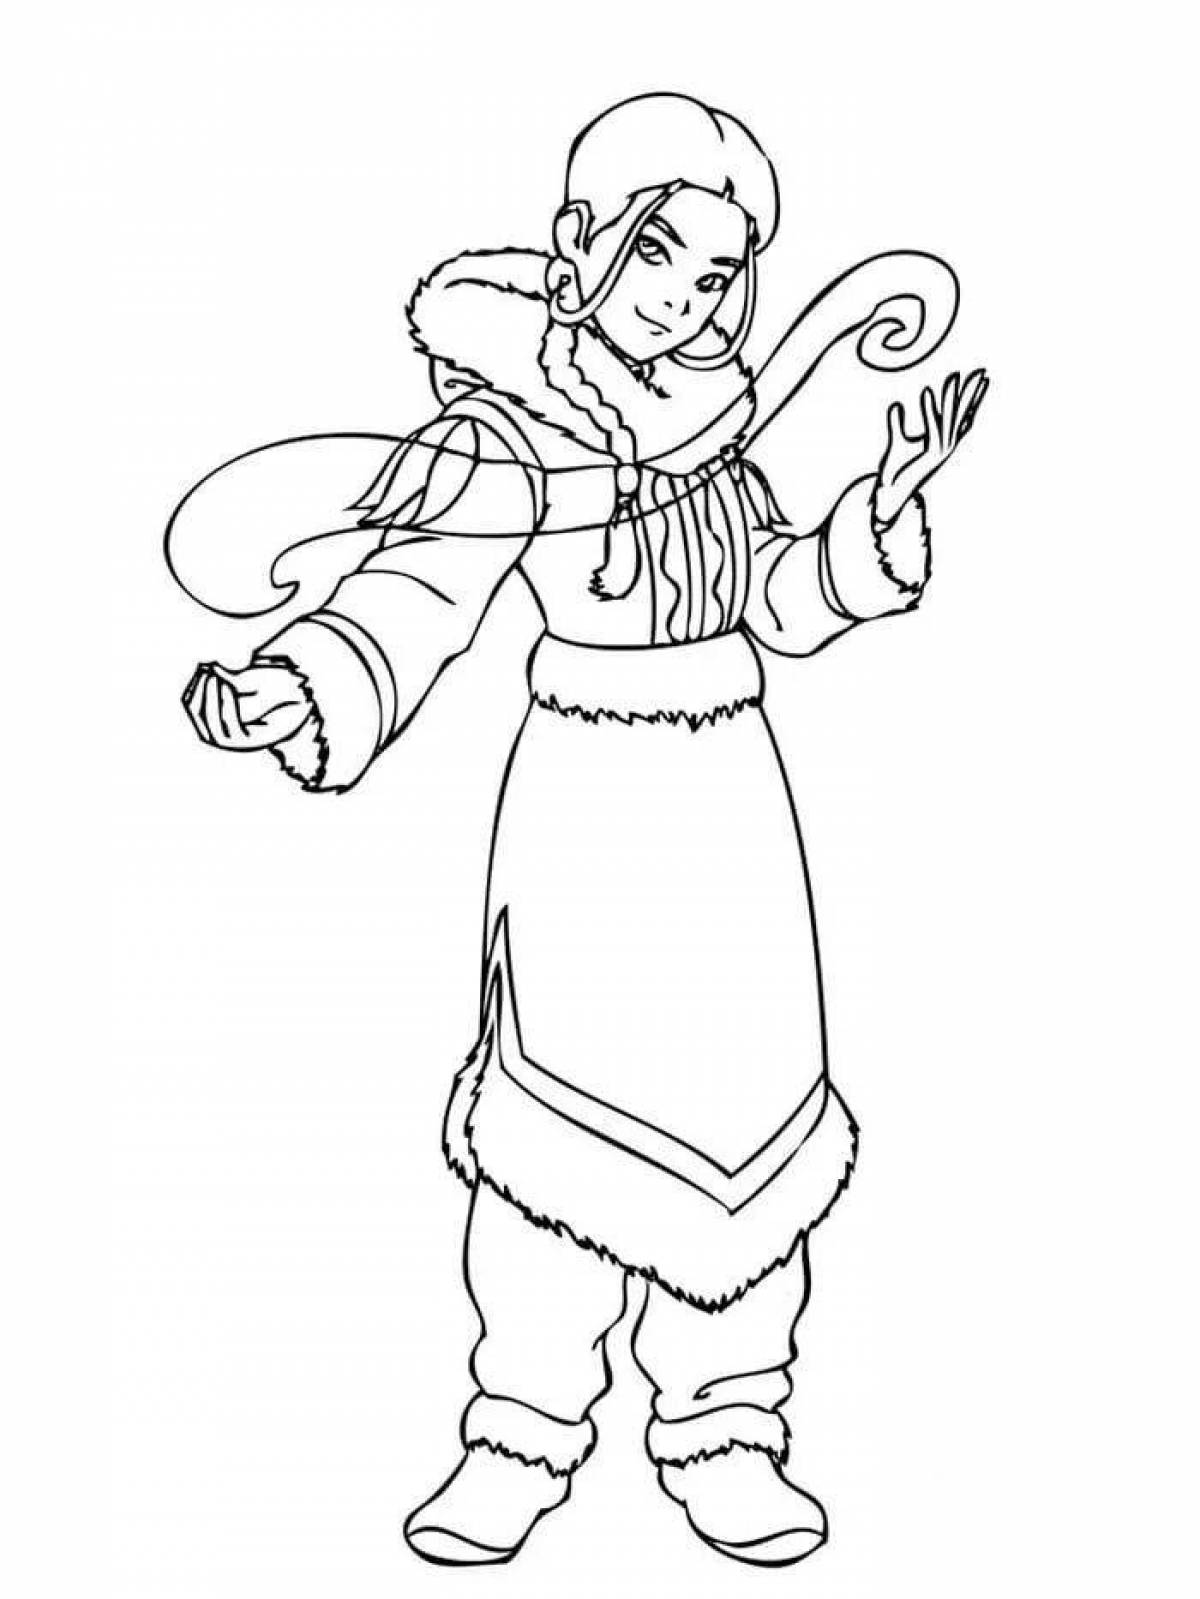 Aang's wild avatar coloring page